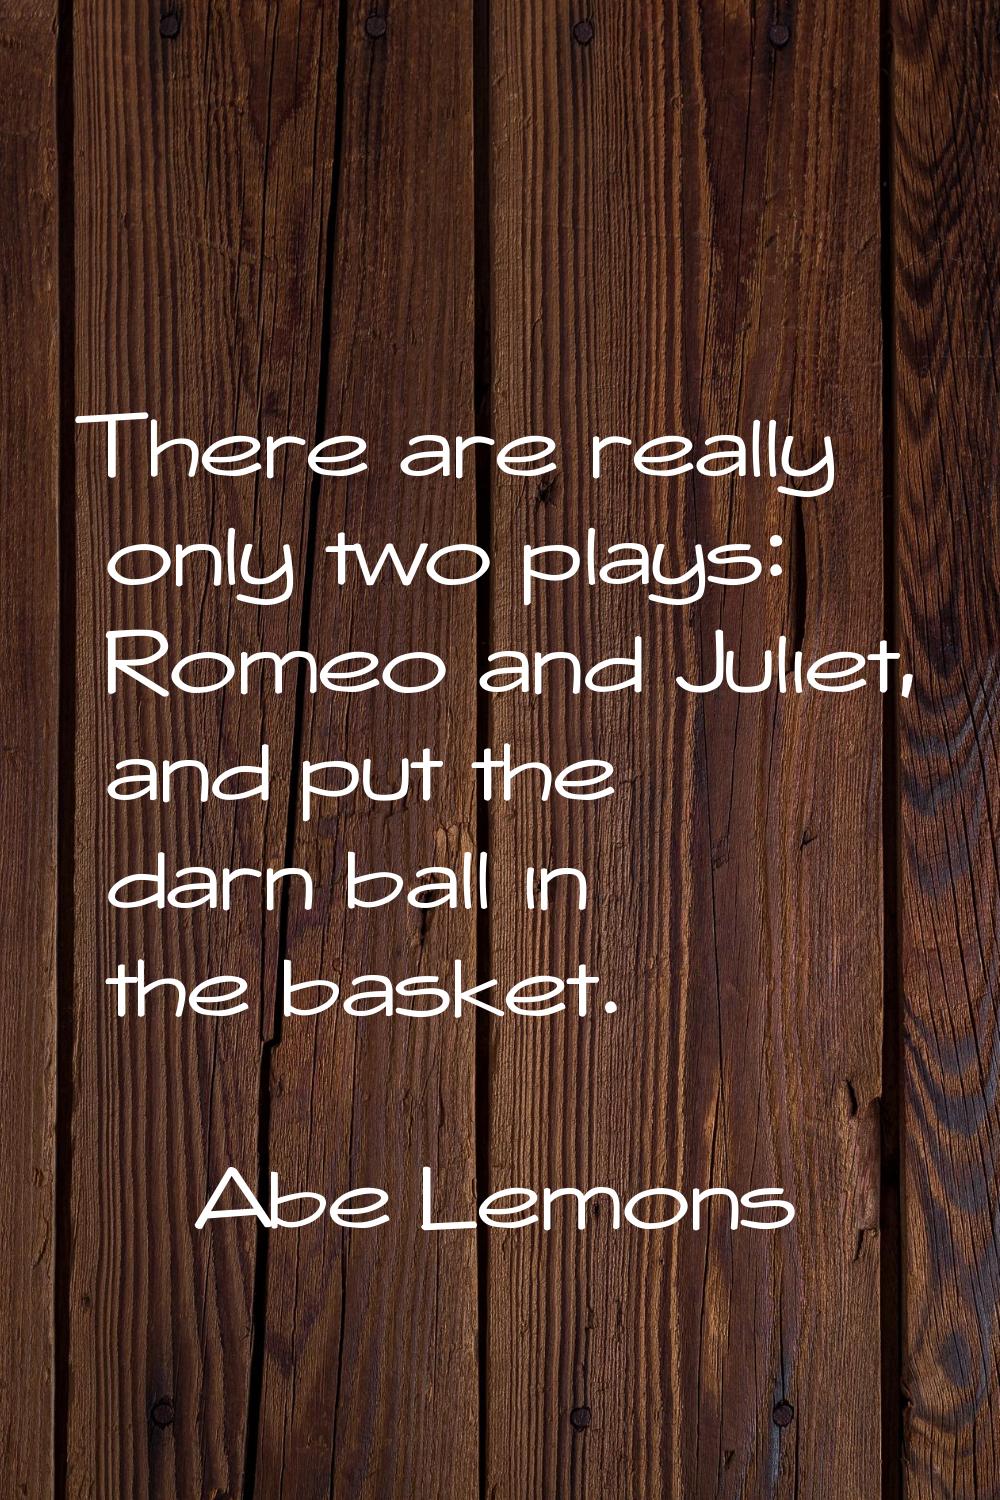 There are really only two plays: Romeo and Juliet, and put the darn ball in the basket.